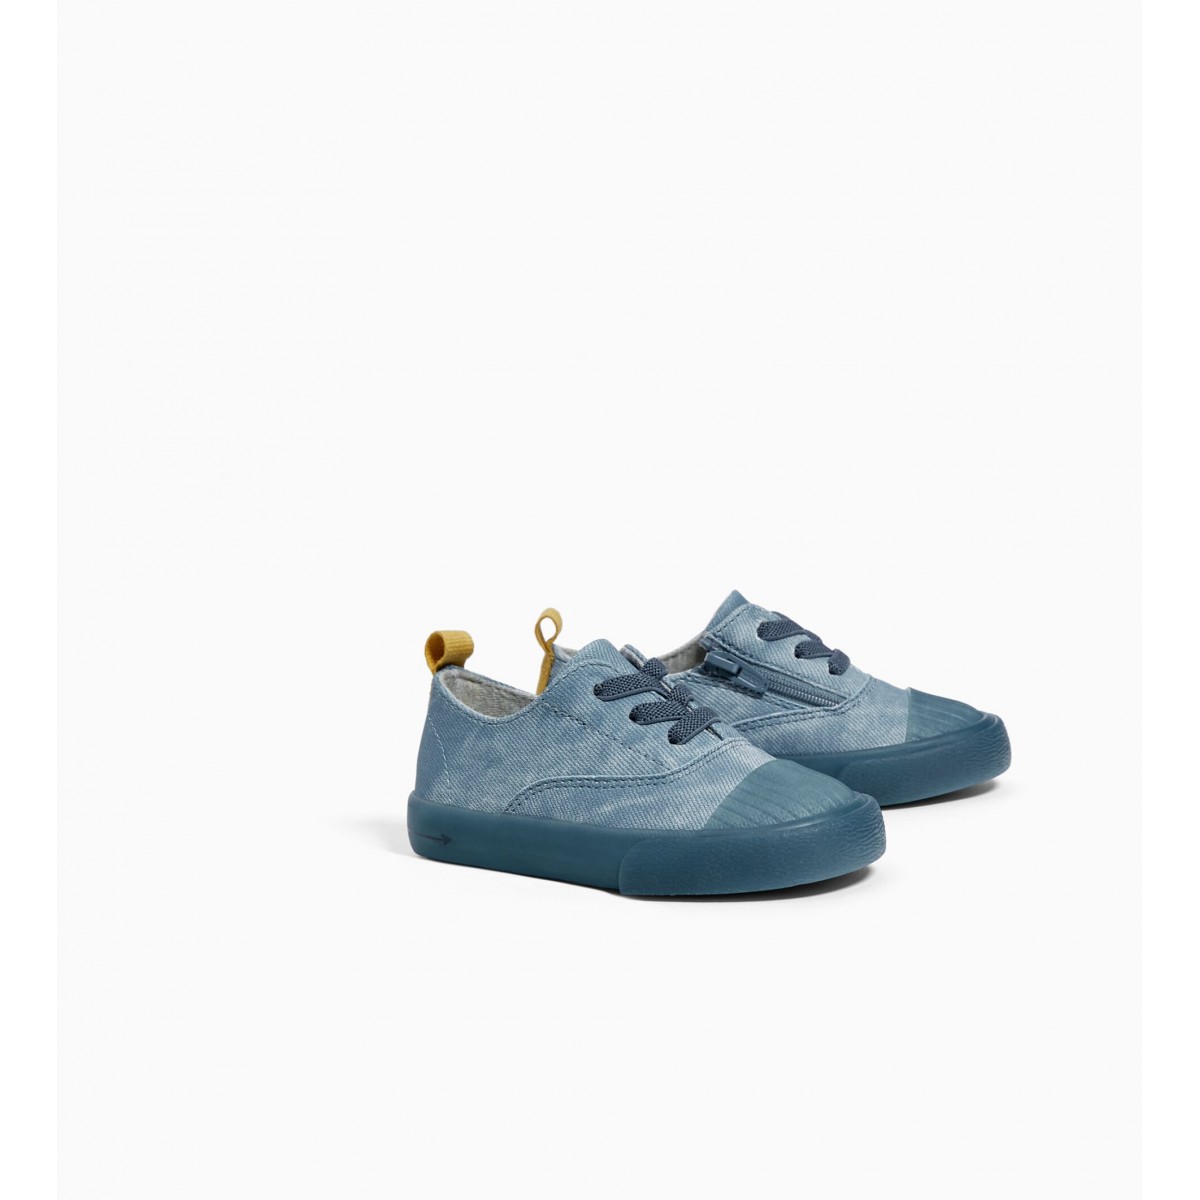 Zara Blue Lace-up Sneakers